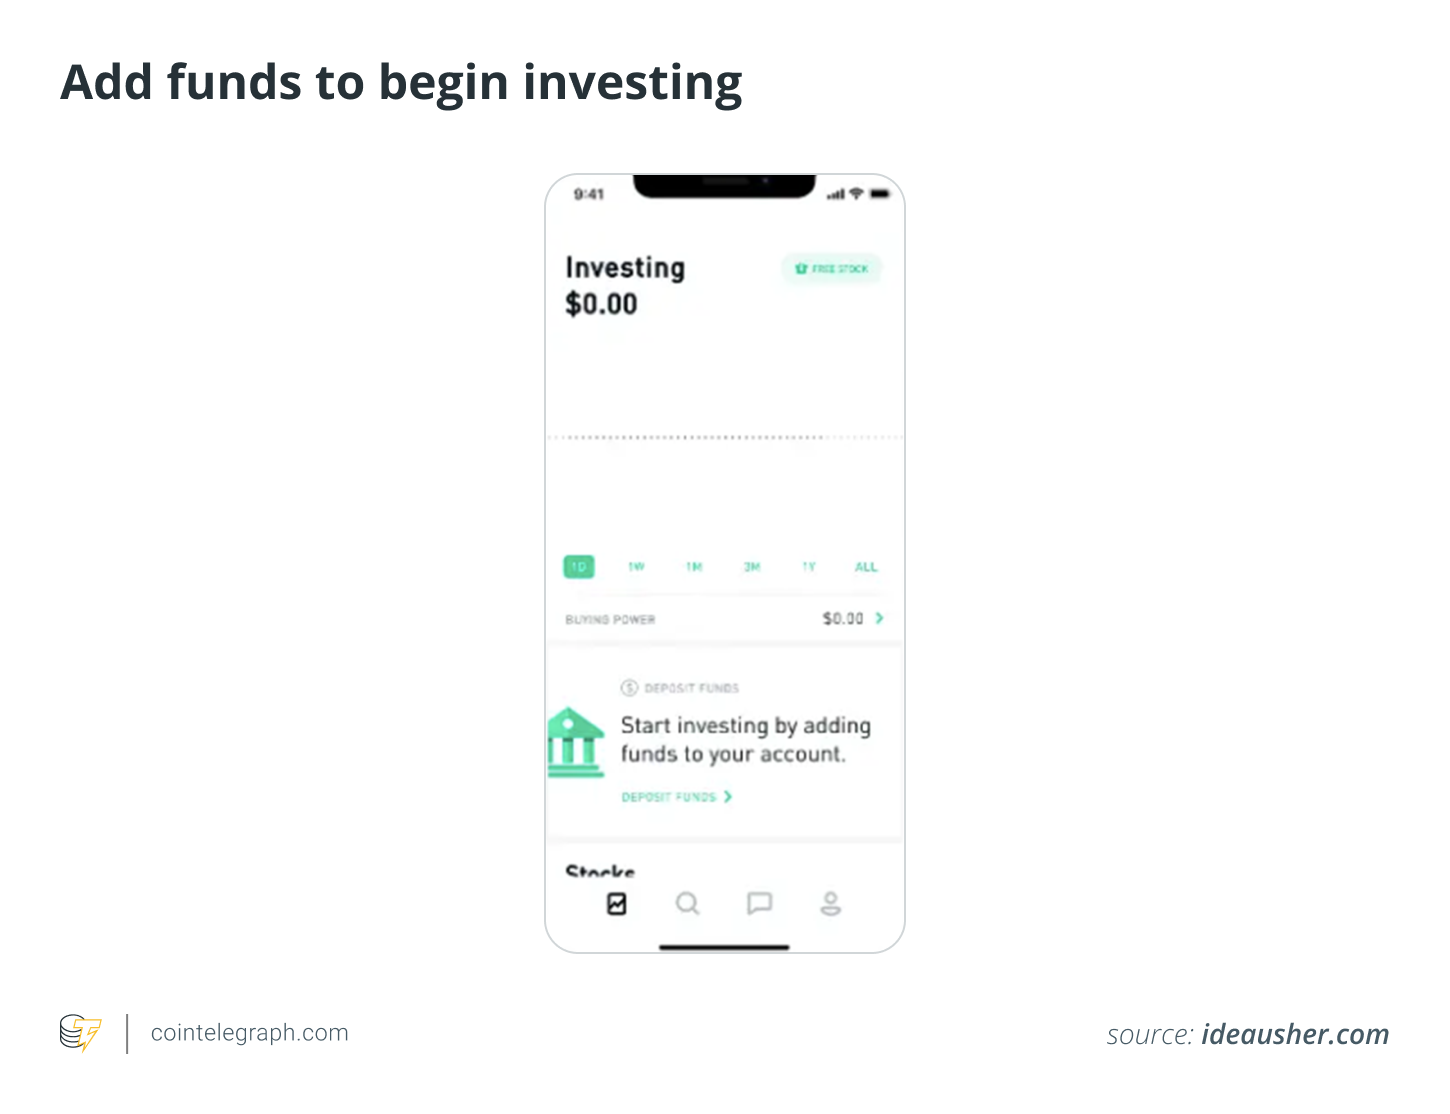 Add funds to begin investing